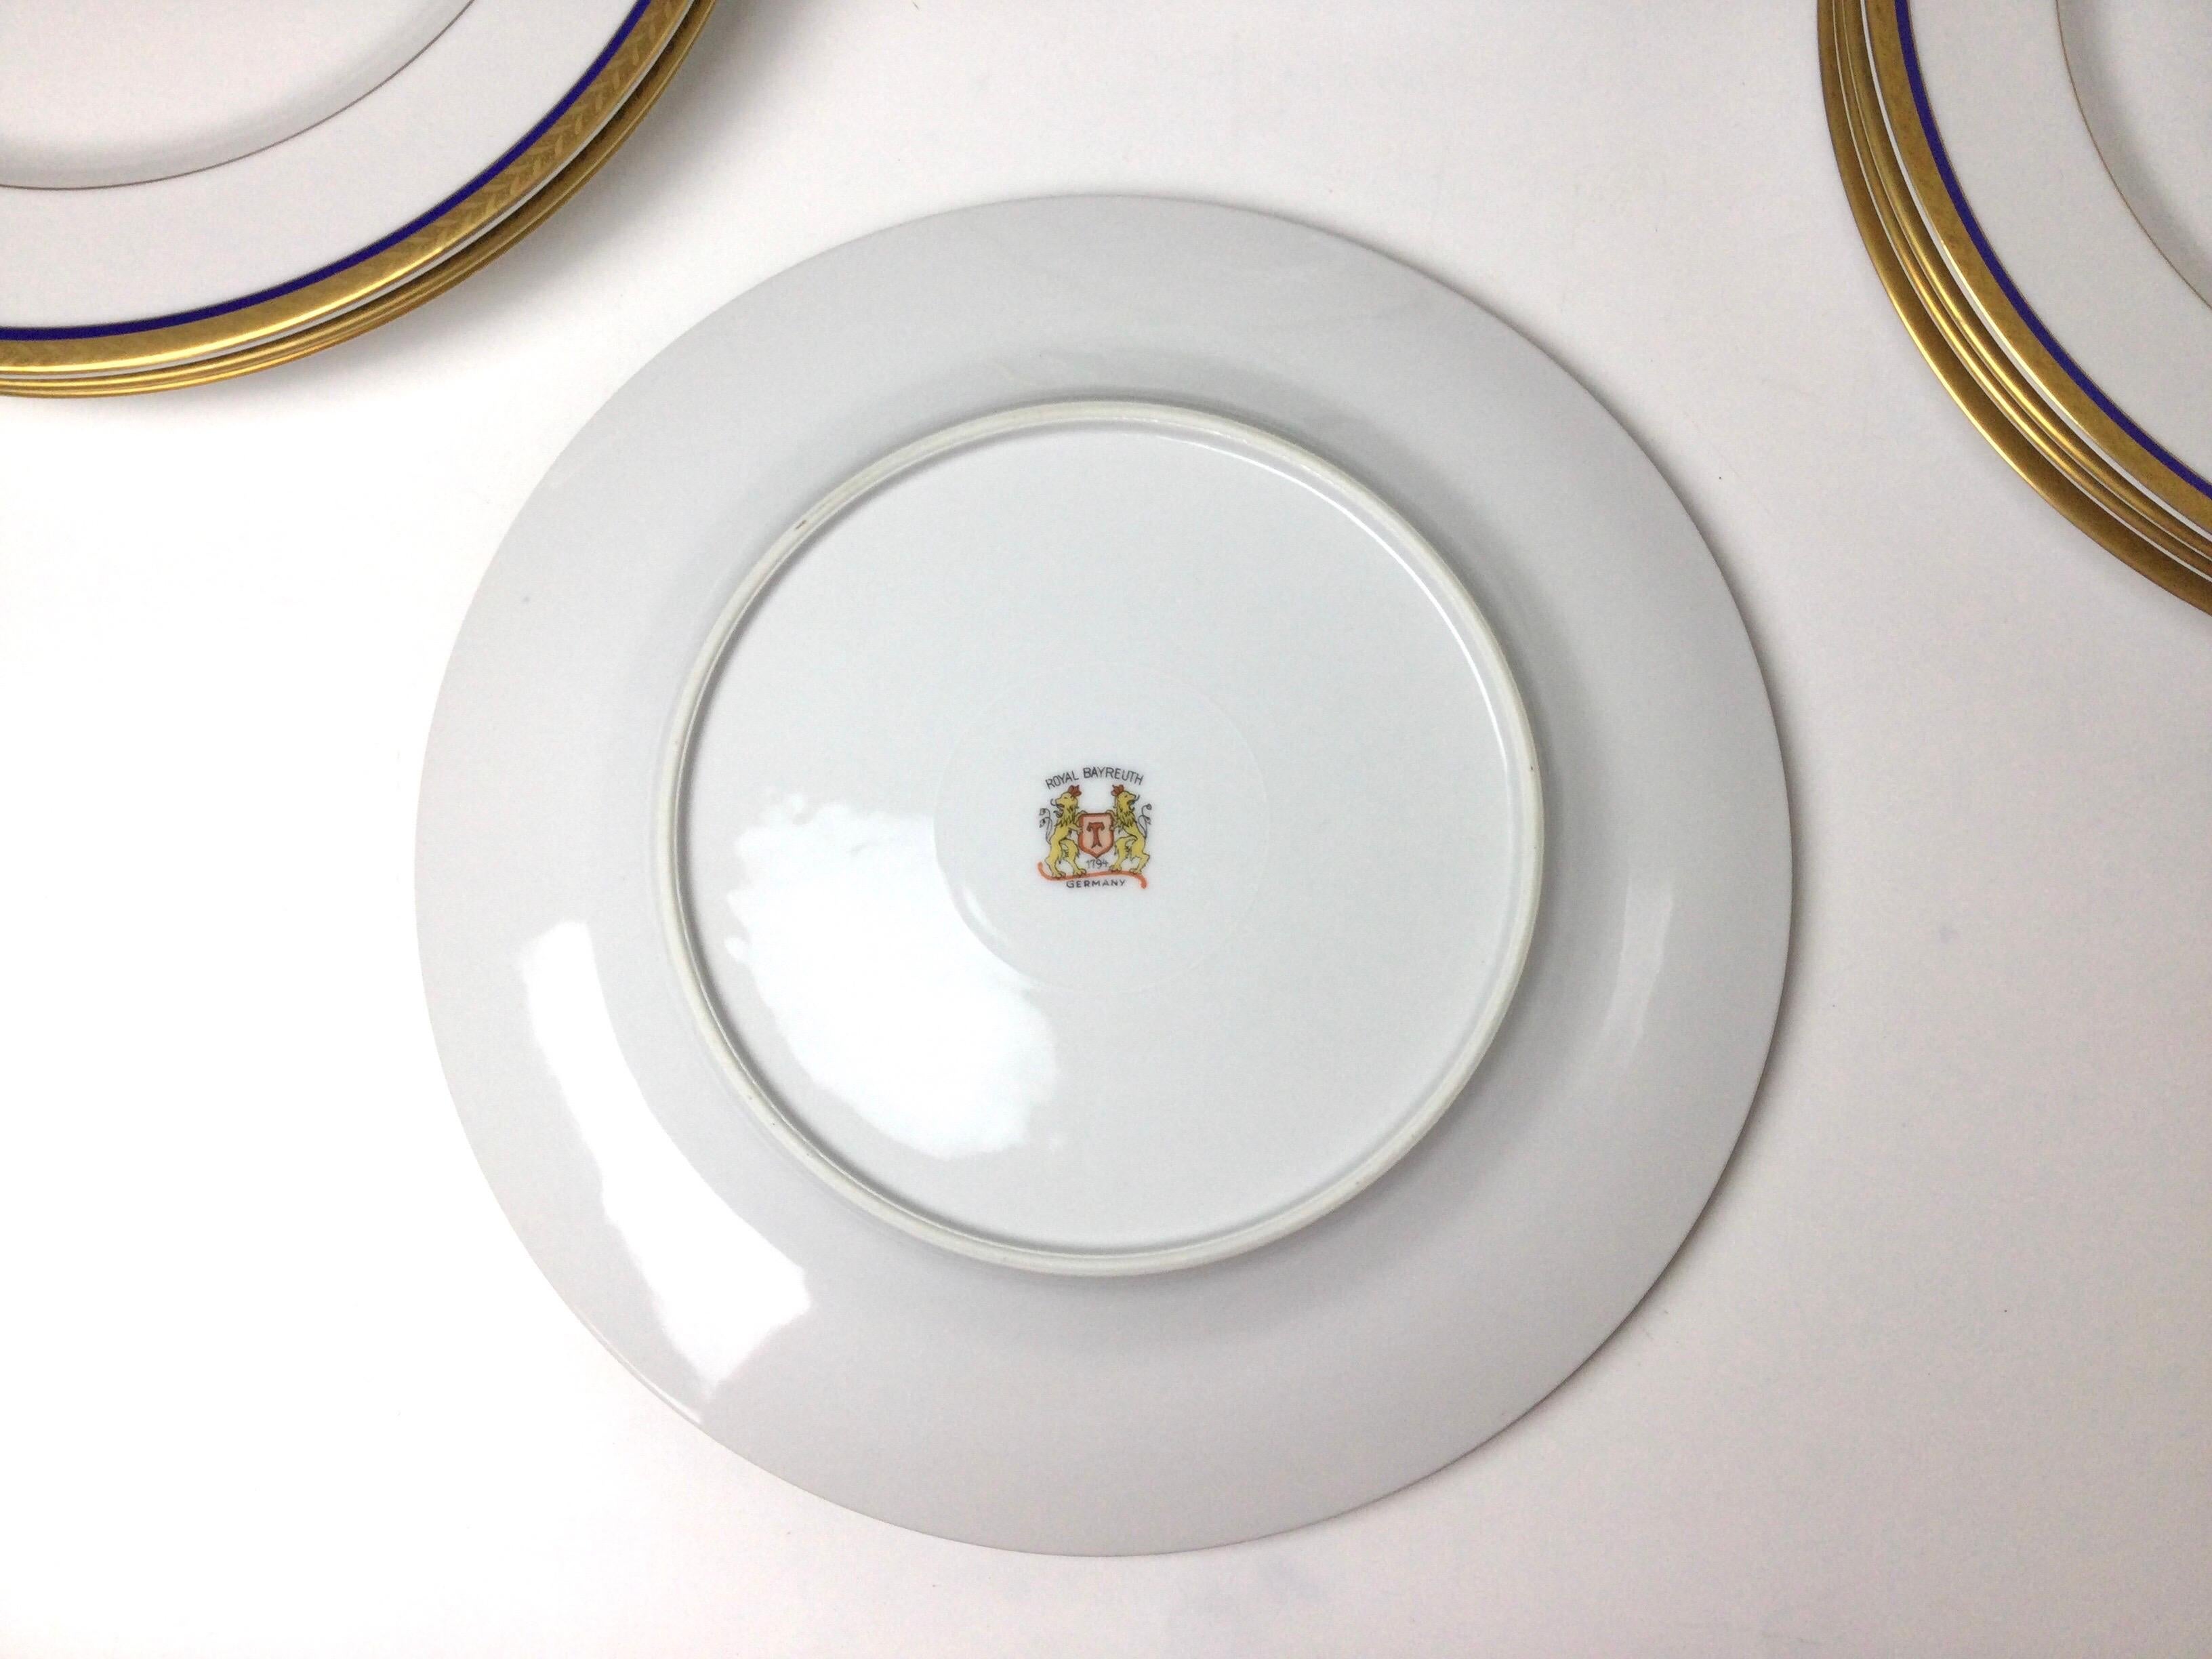 Set of 12 Royal Bayreuth China Dinner Plates White with Cobalt and Gilt Borders 1